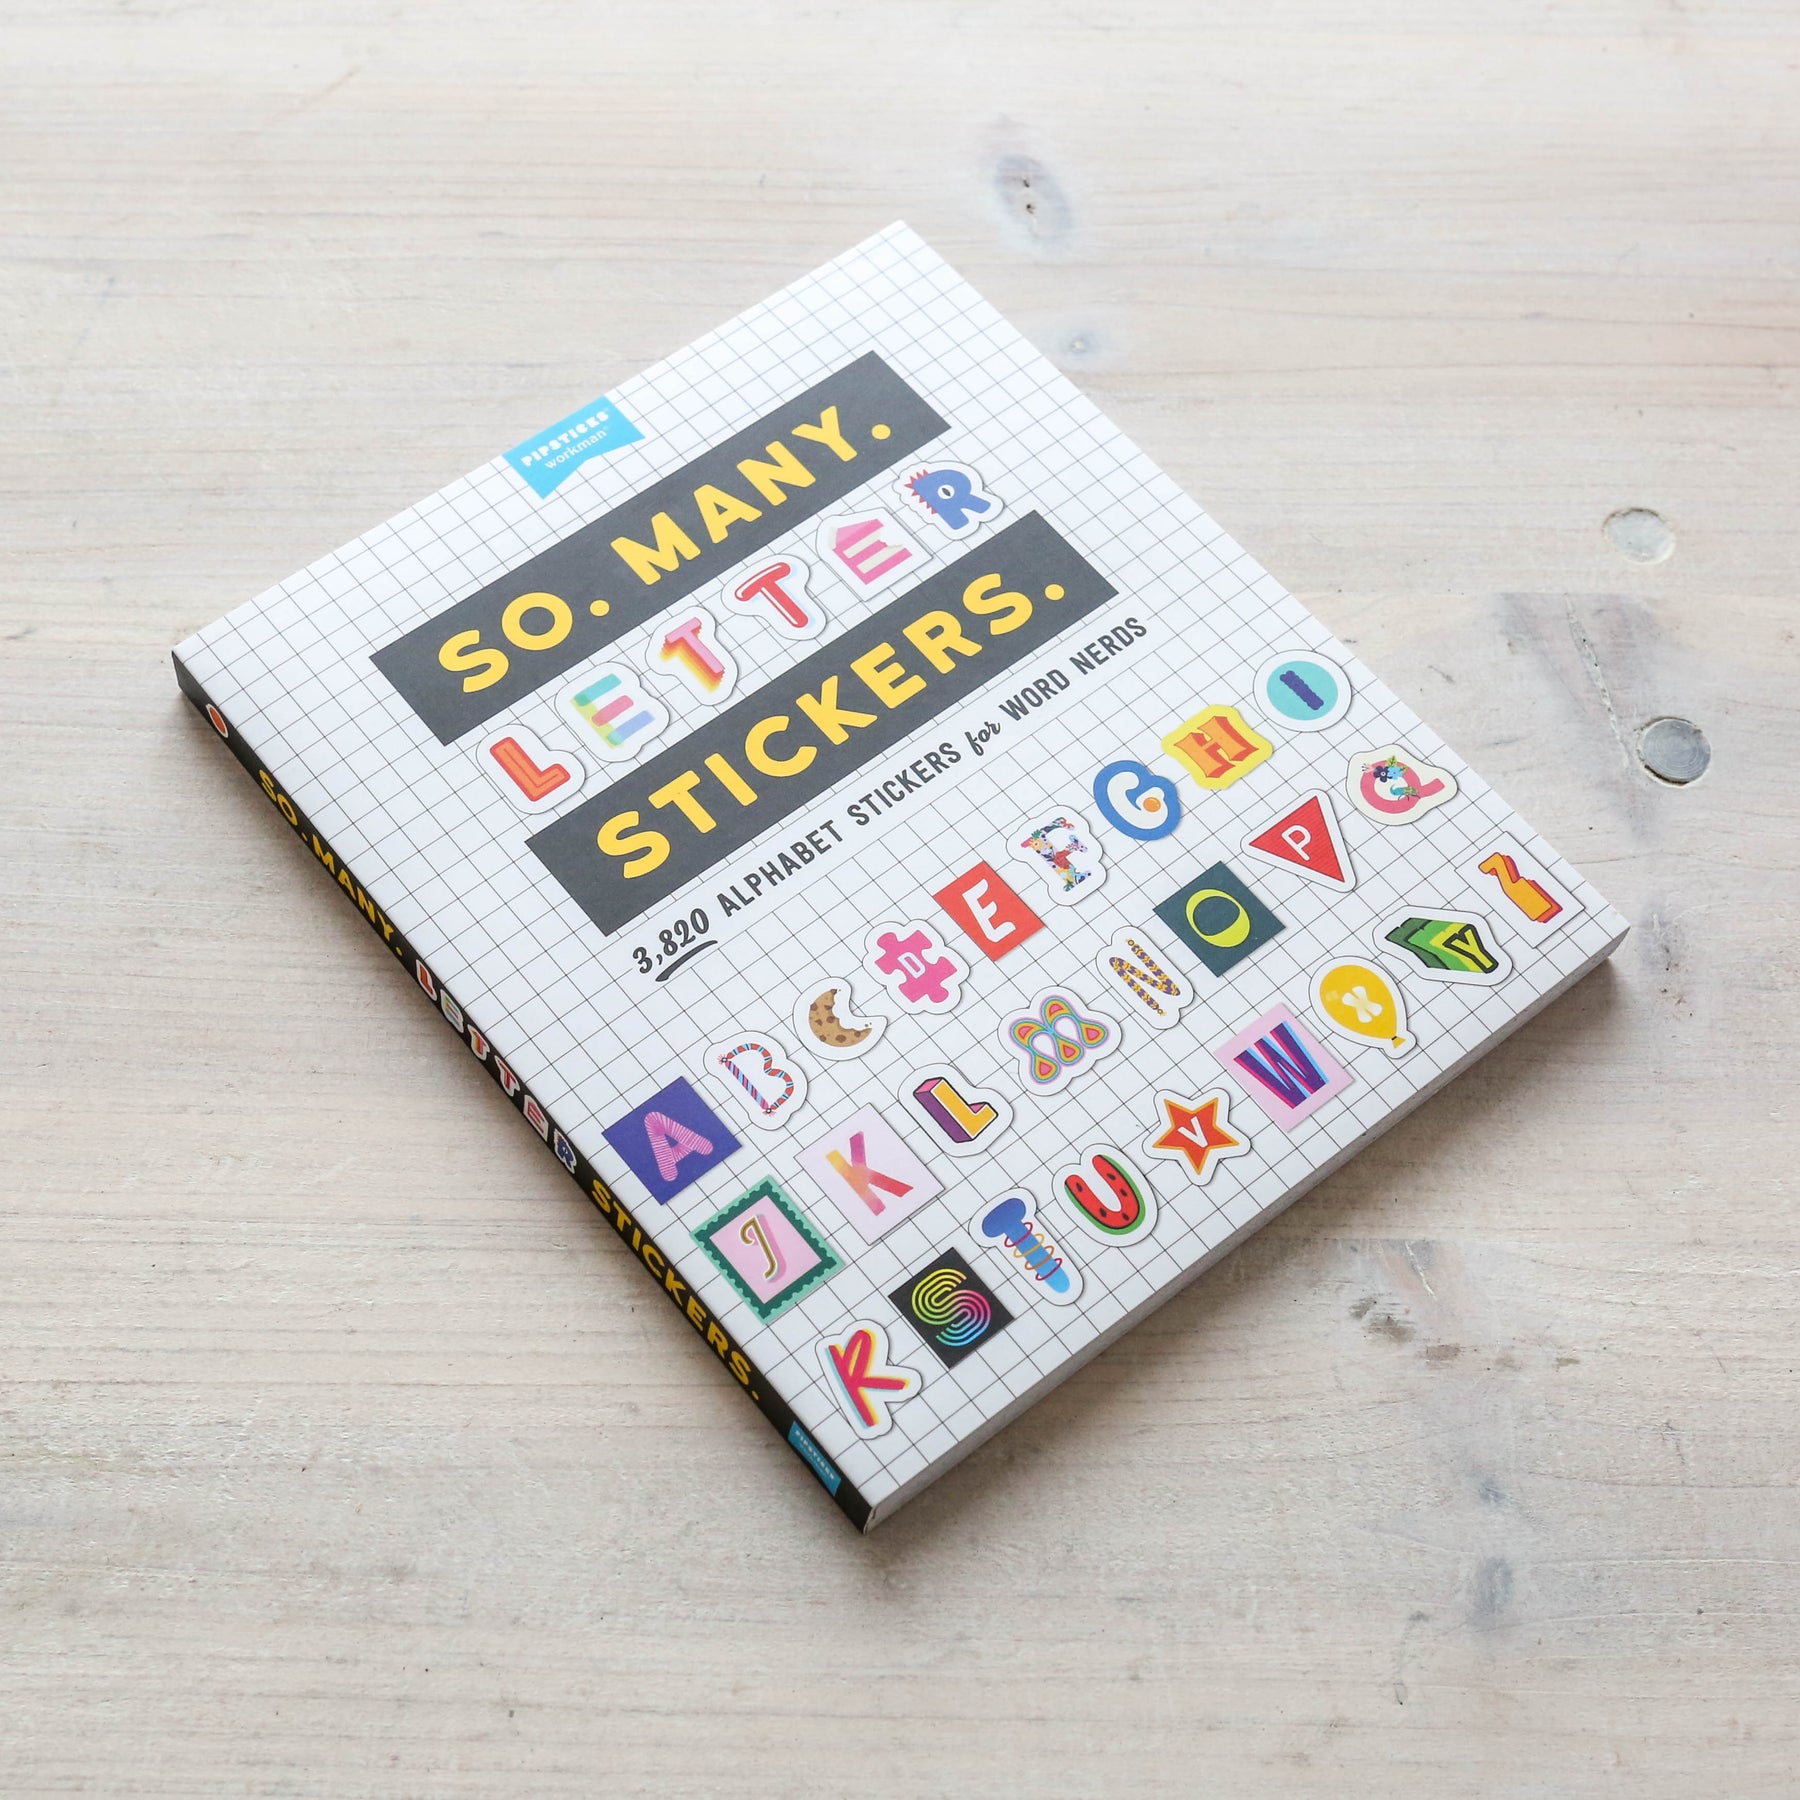 So. Many. Letter Stickers.: 3,820 Alphabet Stickers for Word Nerds  (Pipsticks+Workman)